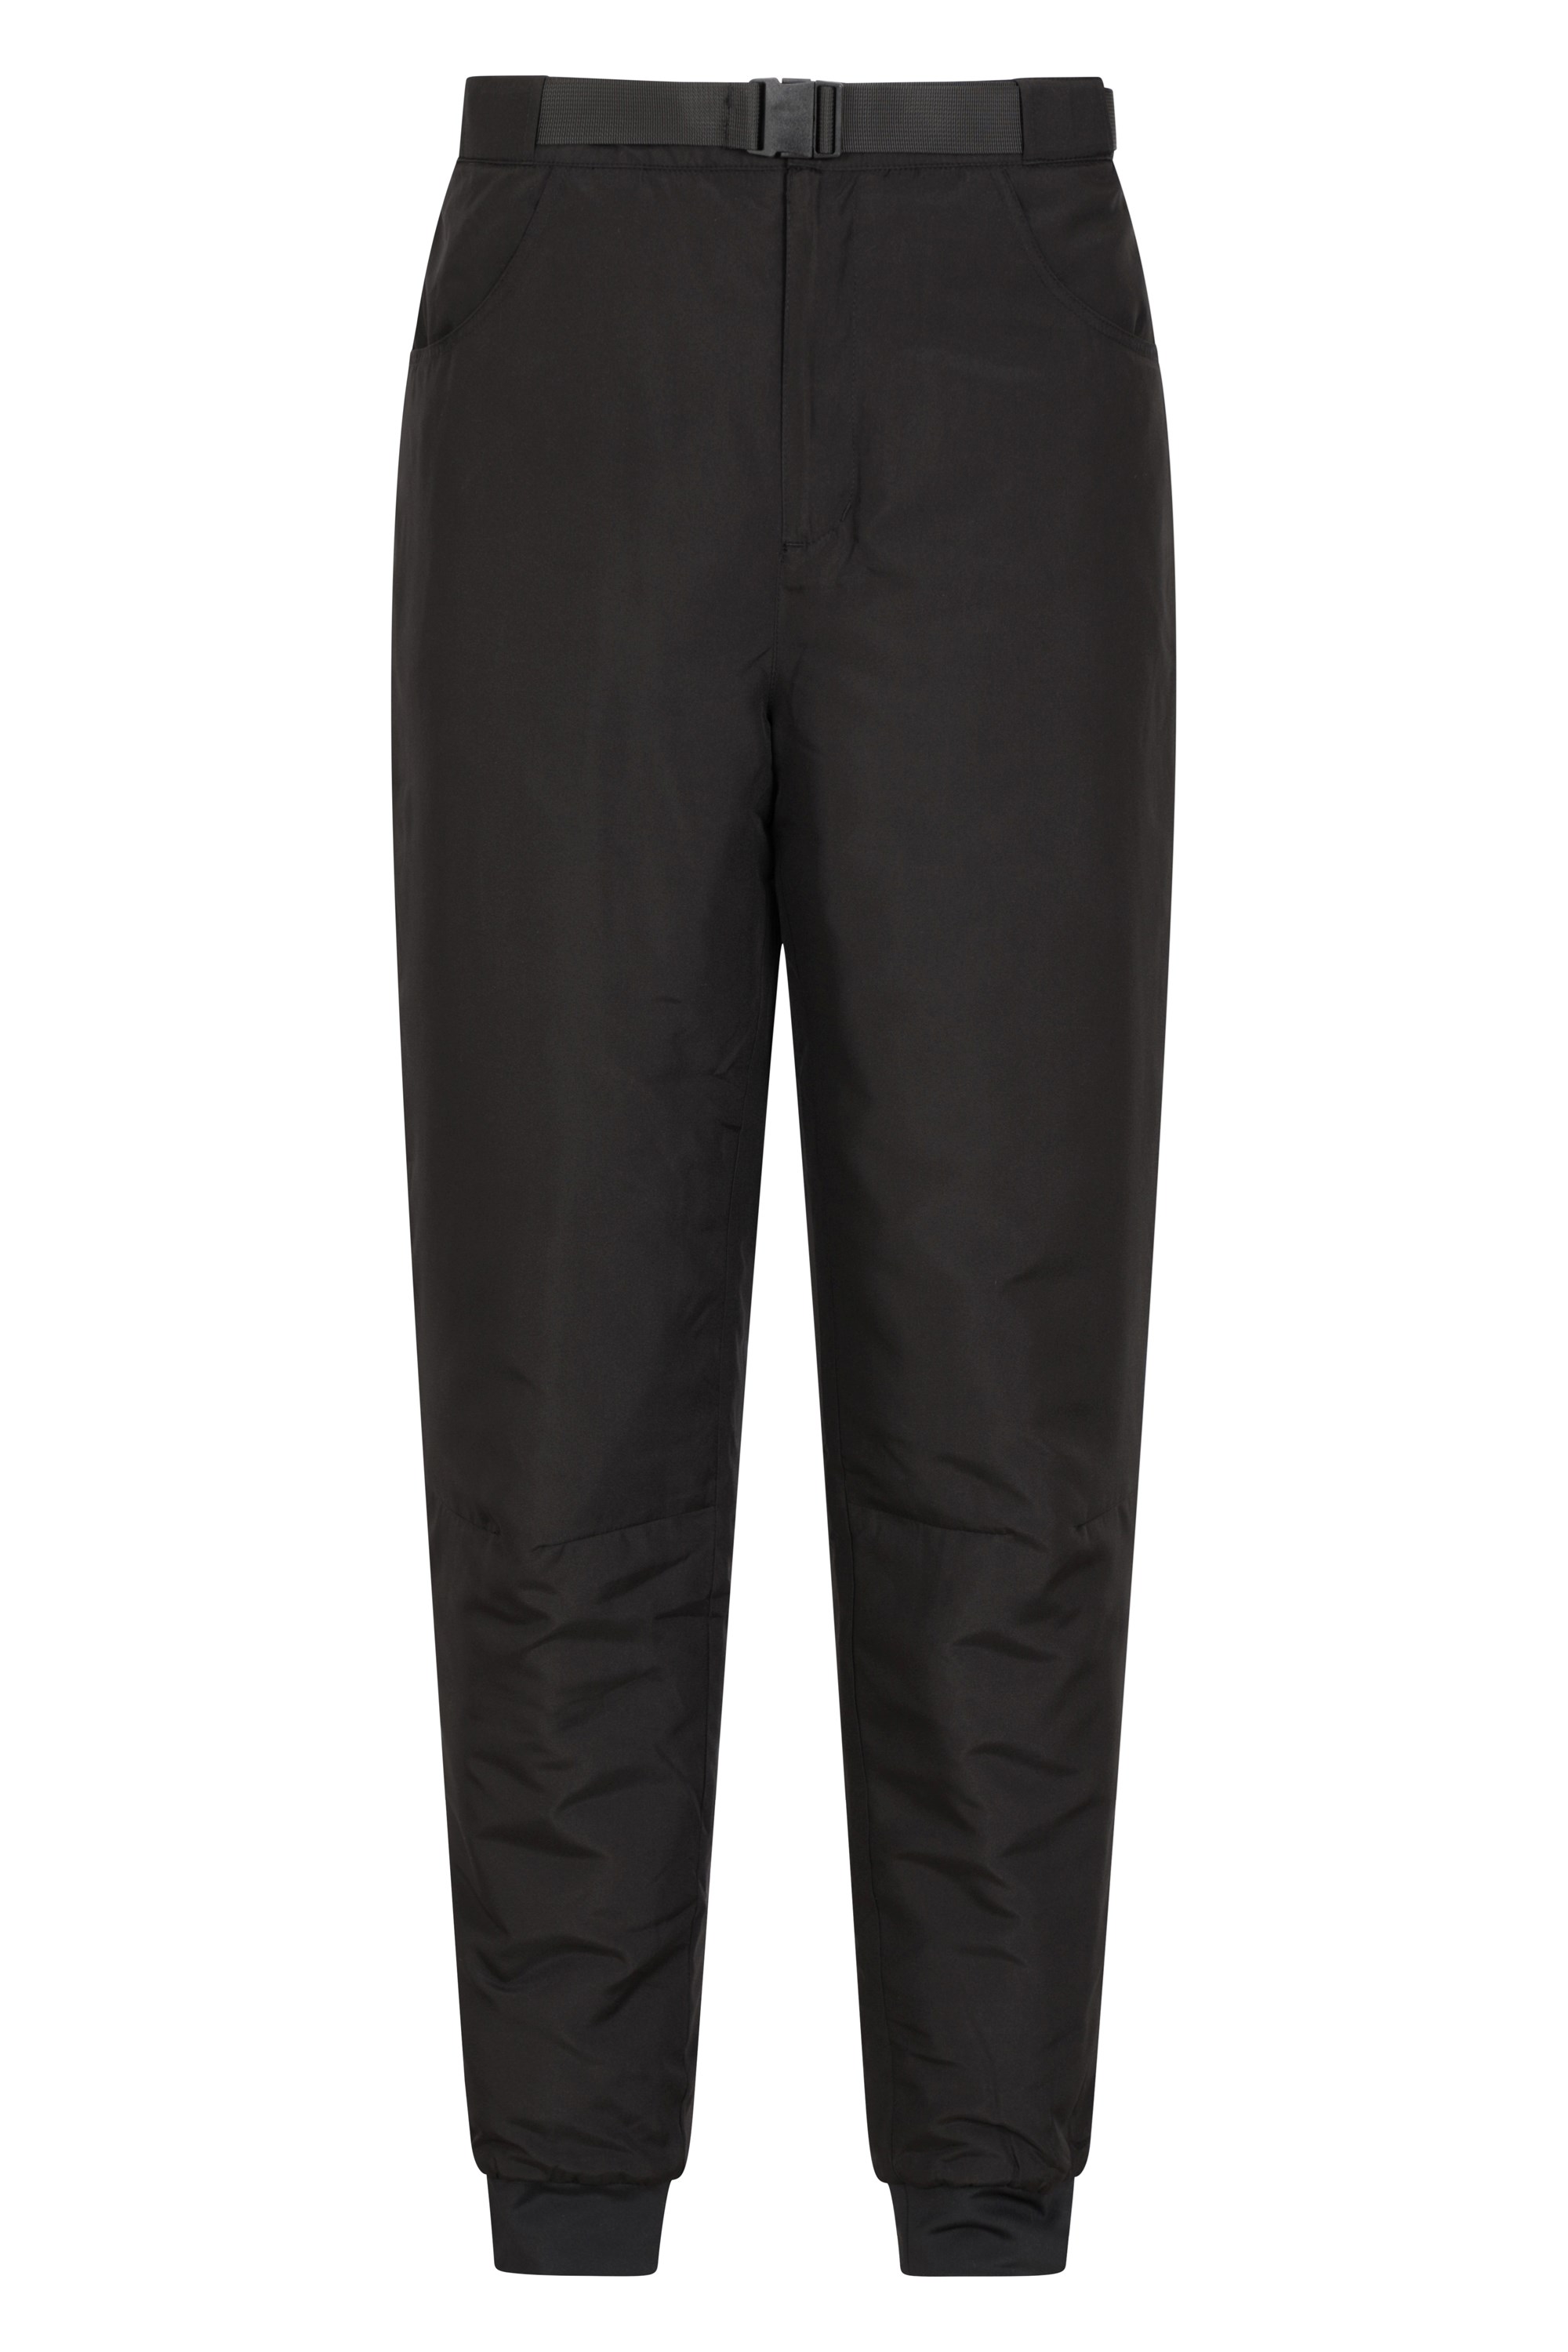 Columbia Maxtrail midweight insulated trousers in black | ASOS